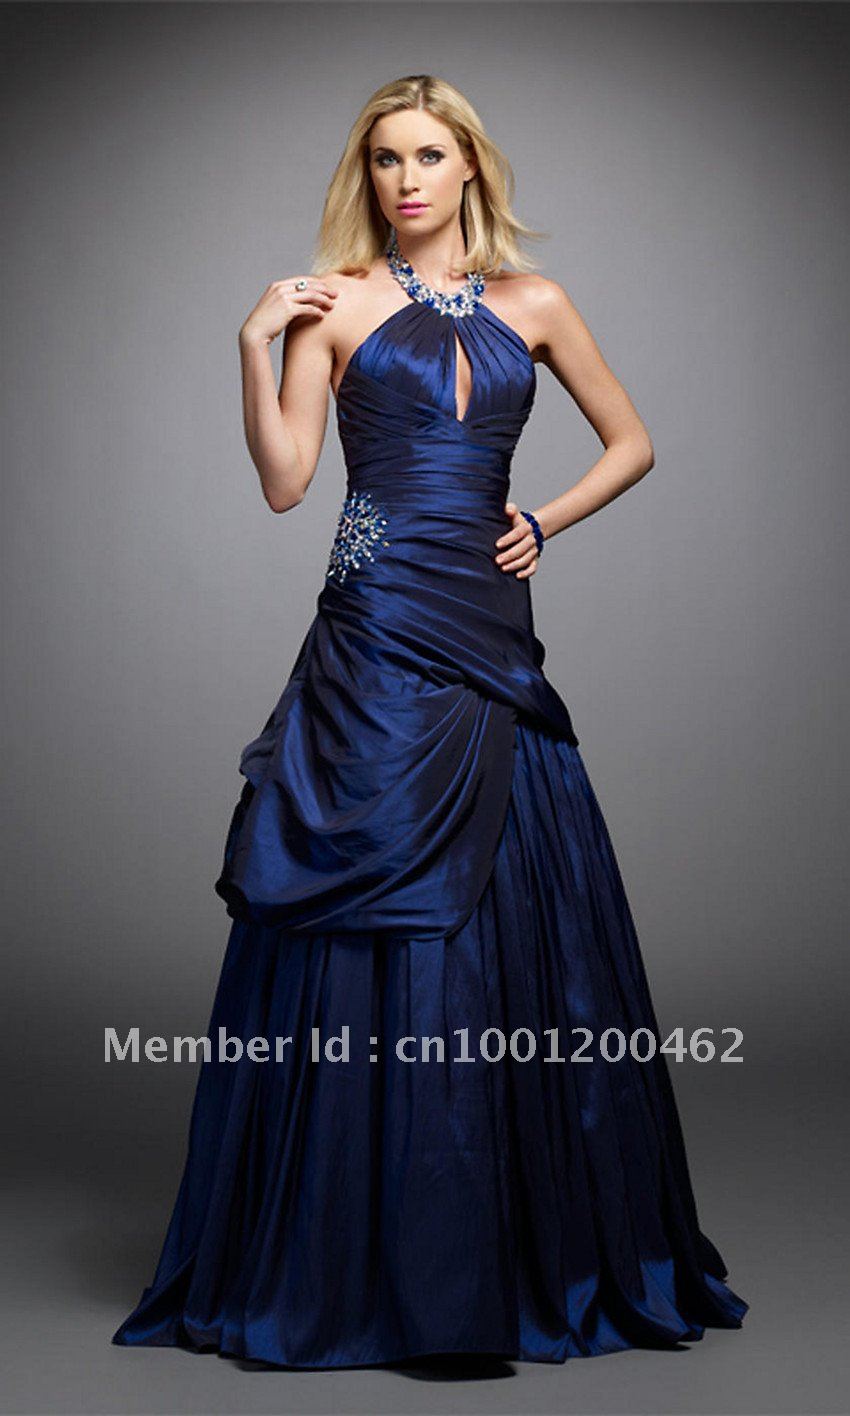 NEW Free shipping  Elegant blue full length backless Halter ruched Taffeta celebrity evening dresses party prom gowns 017